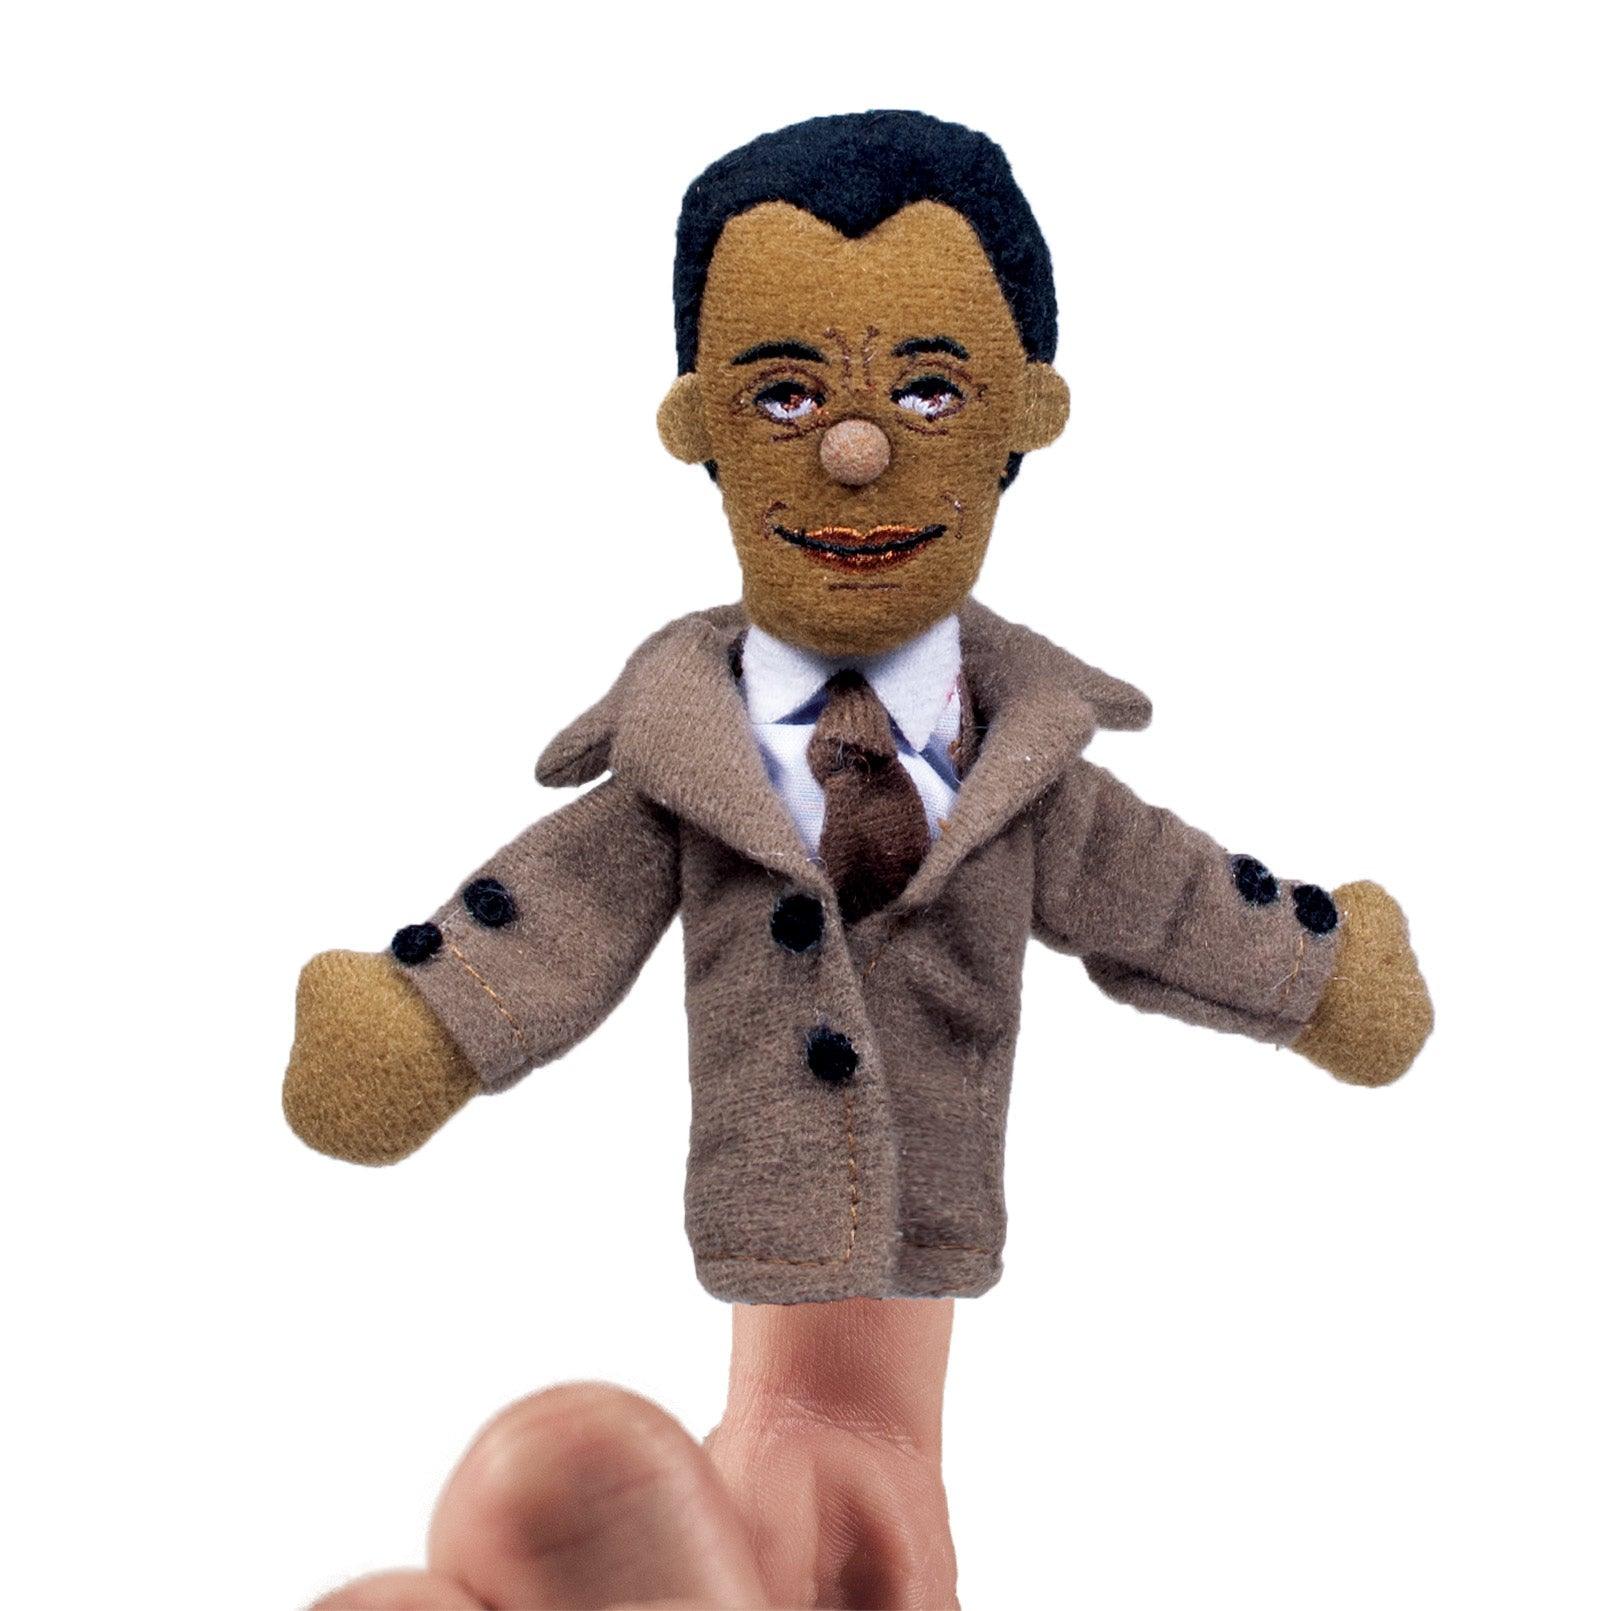 Product photo of James Baldwin Finger Puppet, a novelty gift manufactured by The Unemployed Philosophers Guild.